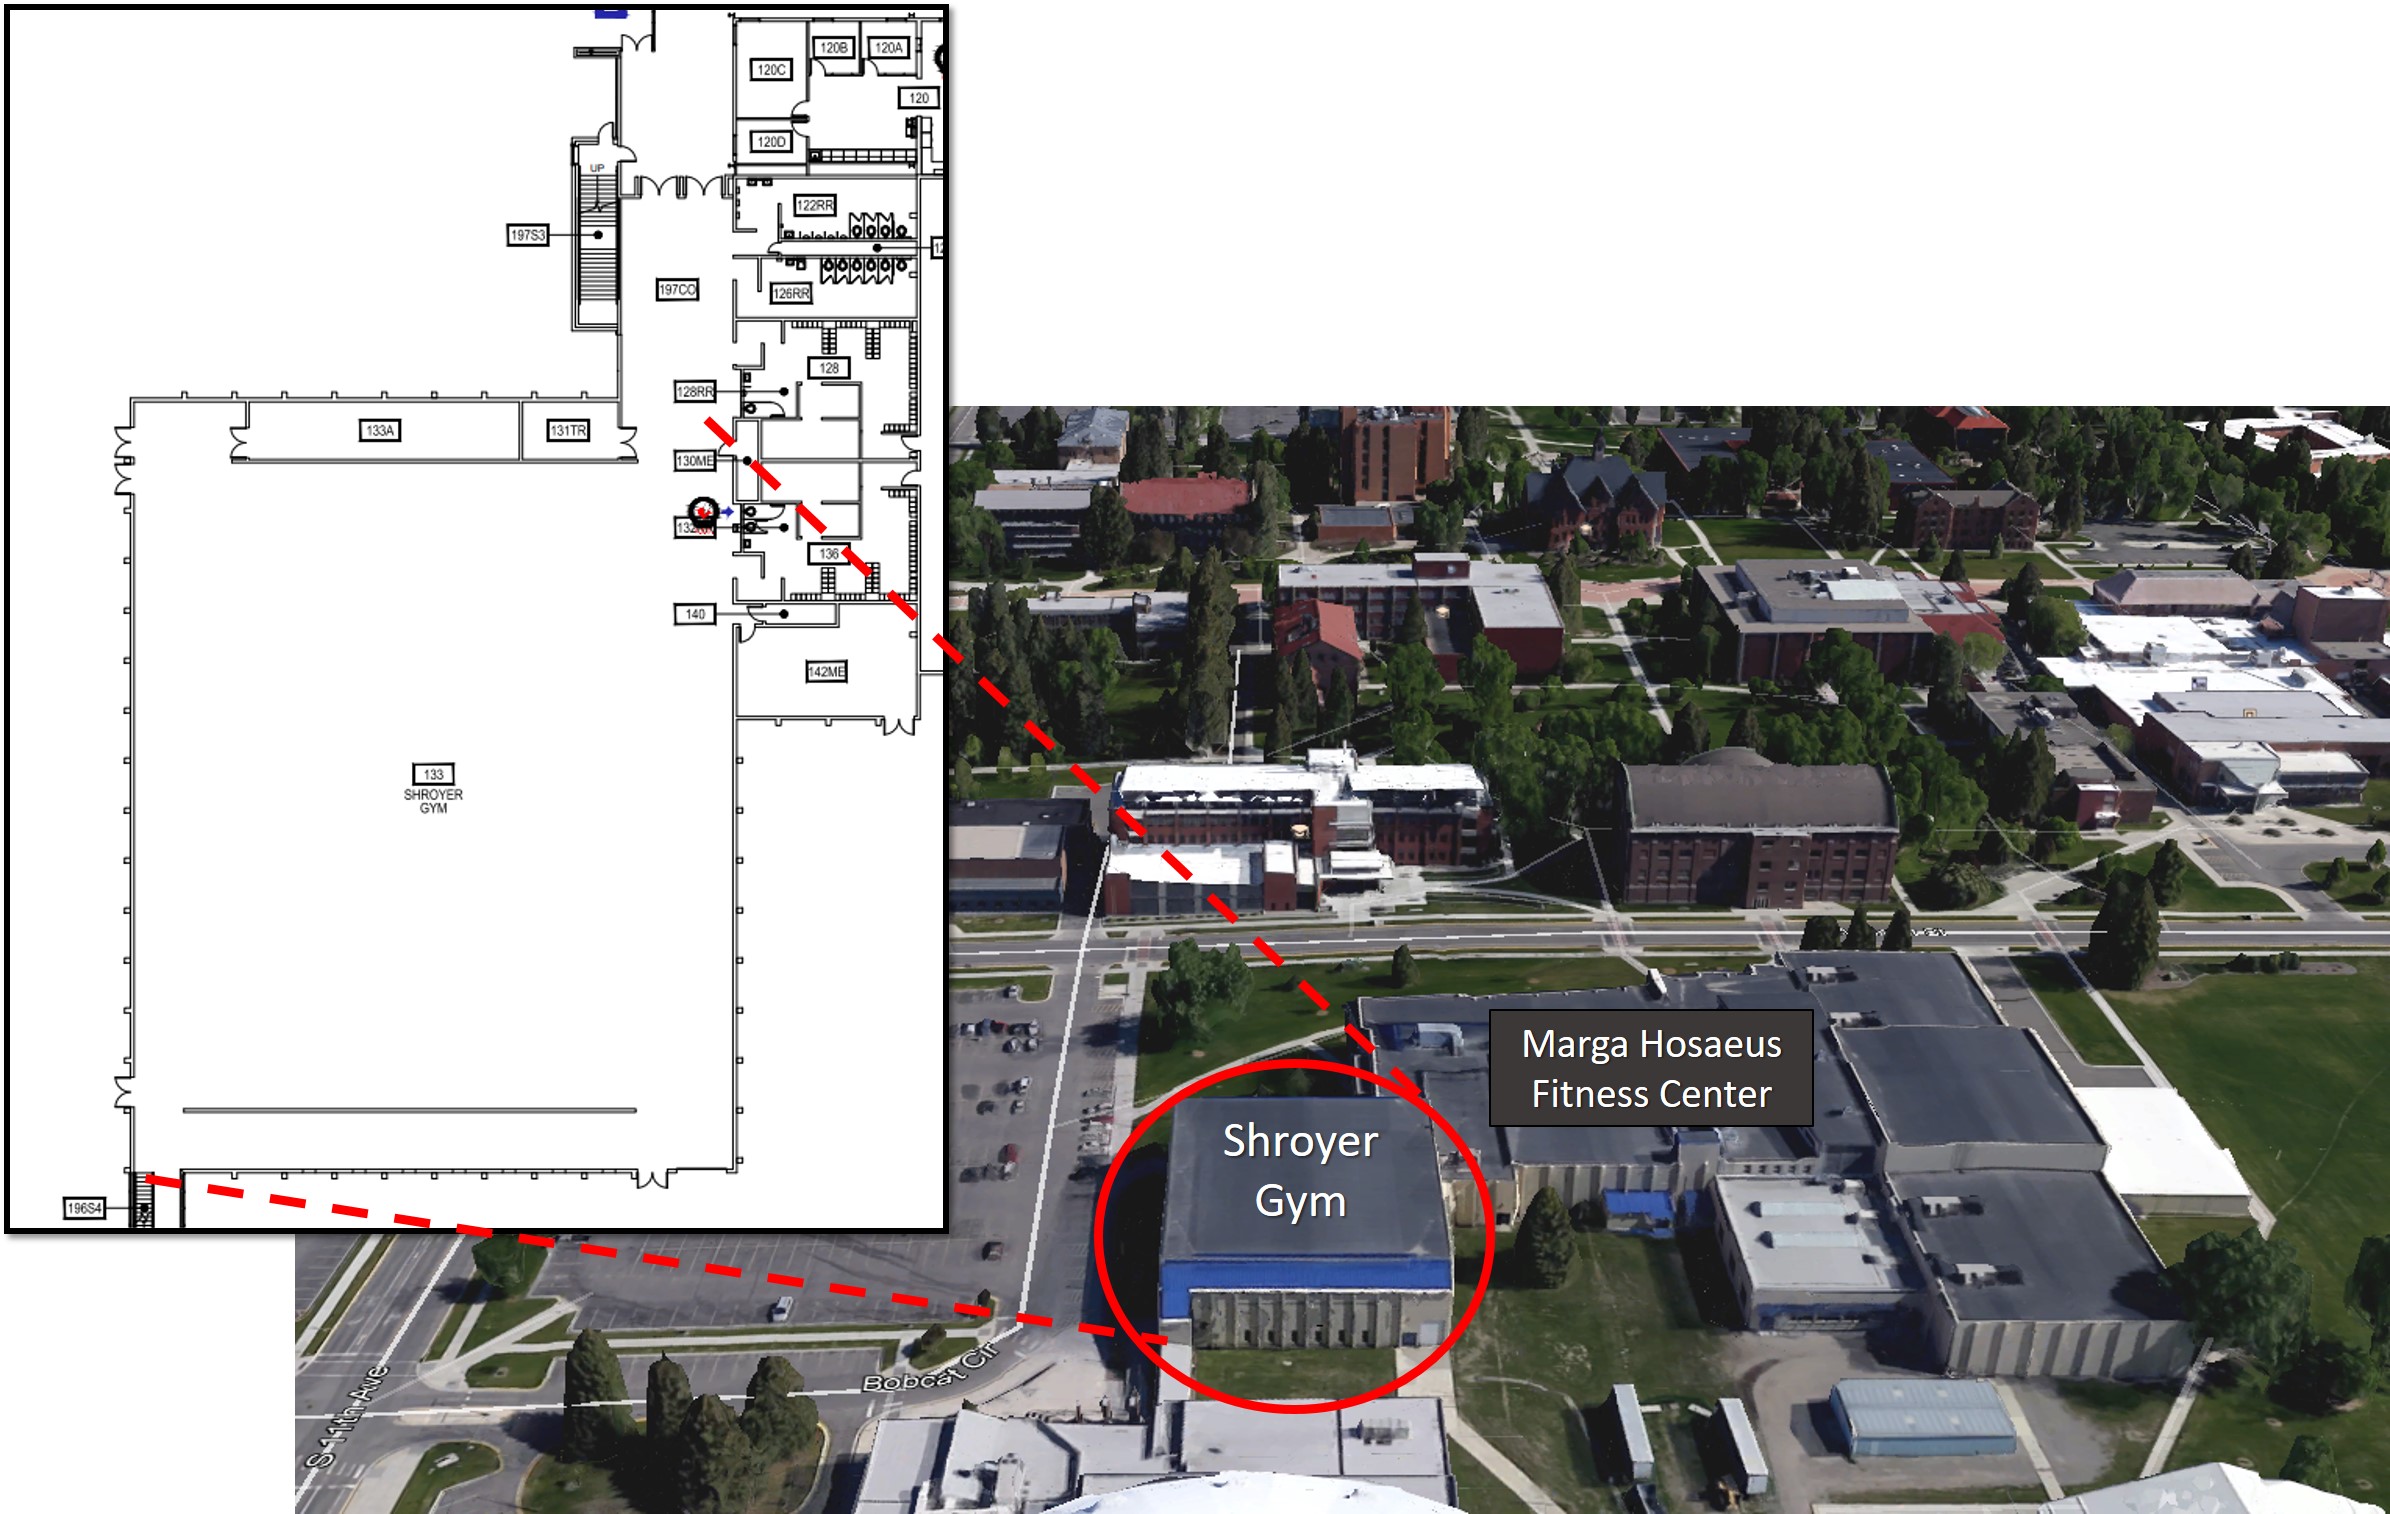 depiction of the location of shroyer gym on campus